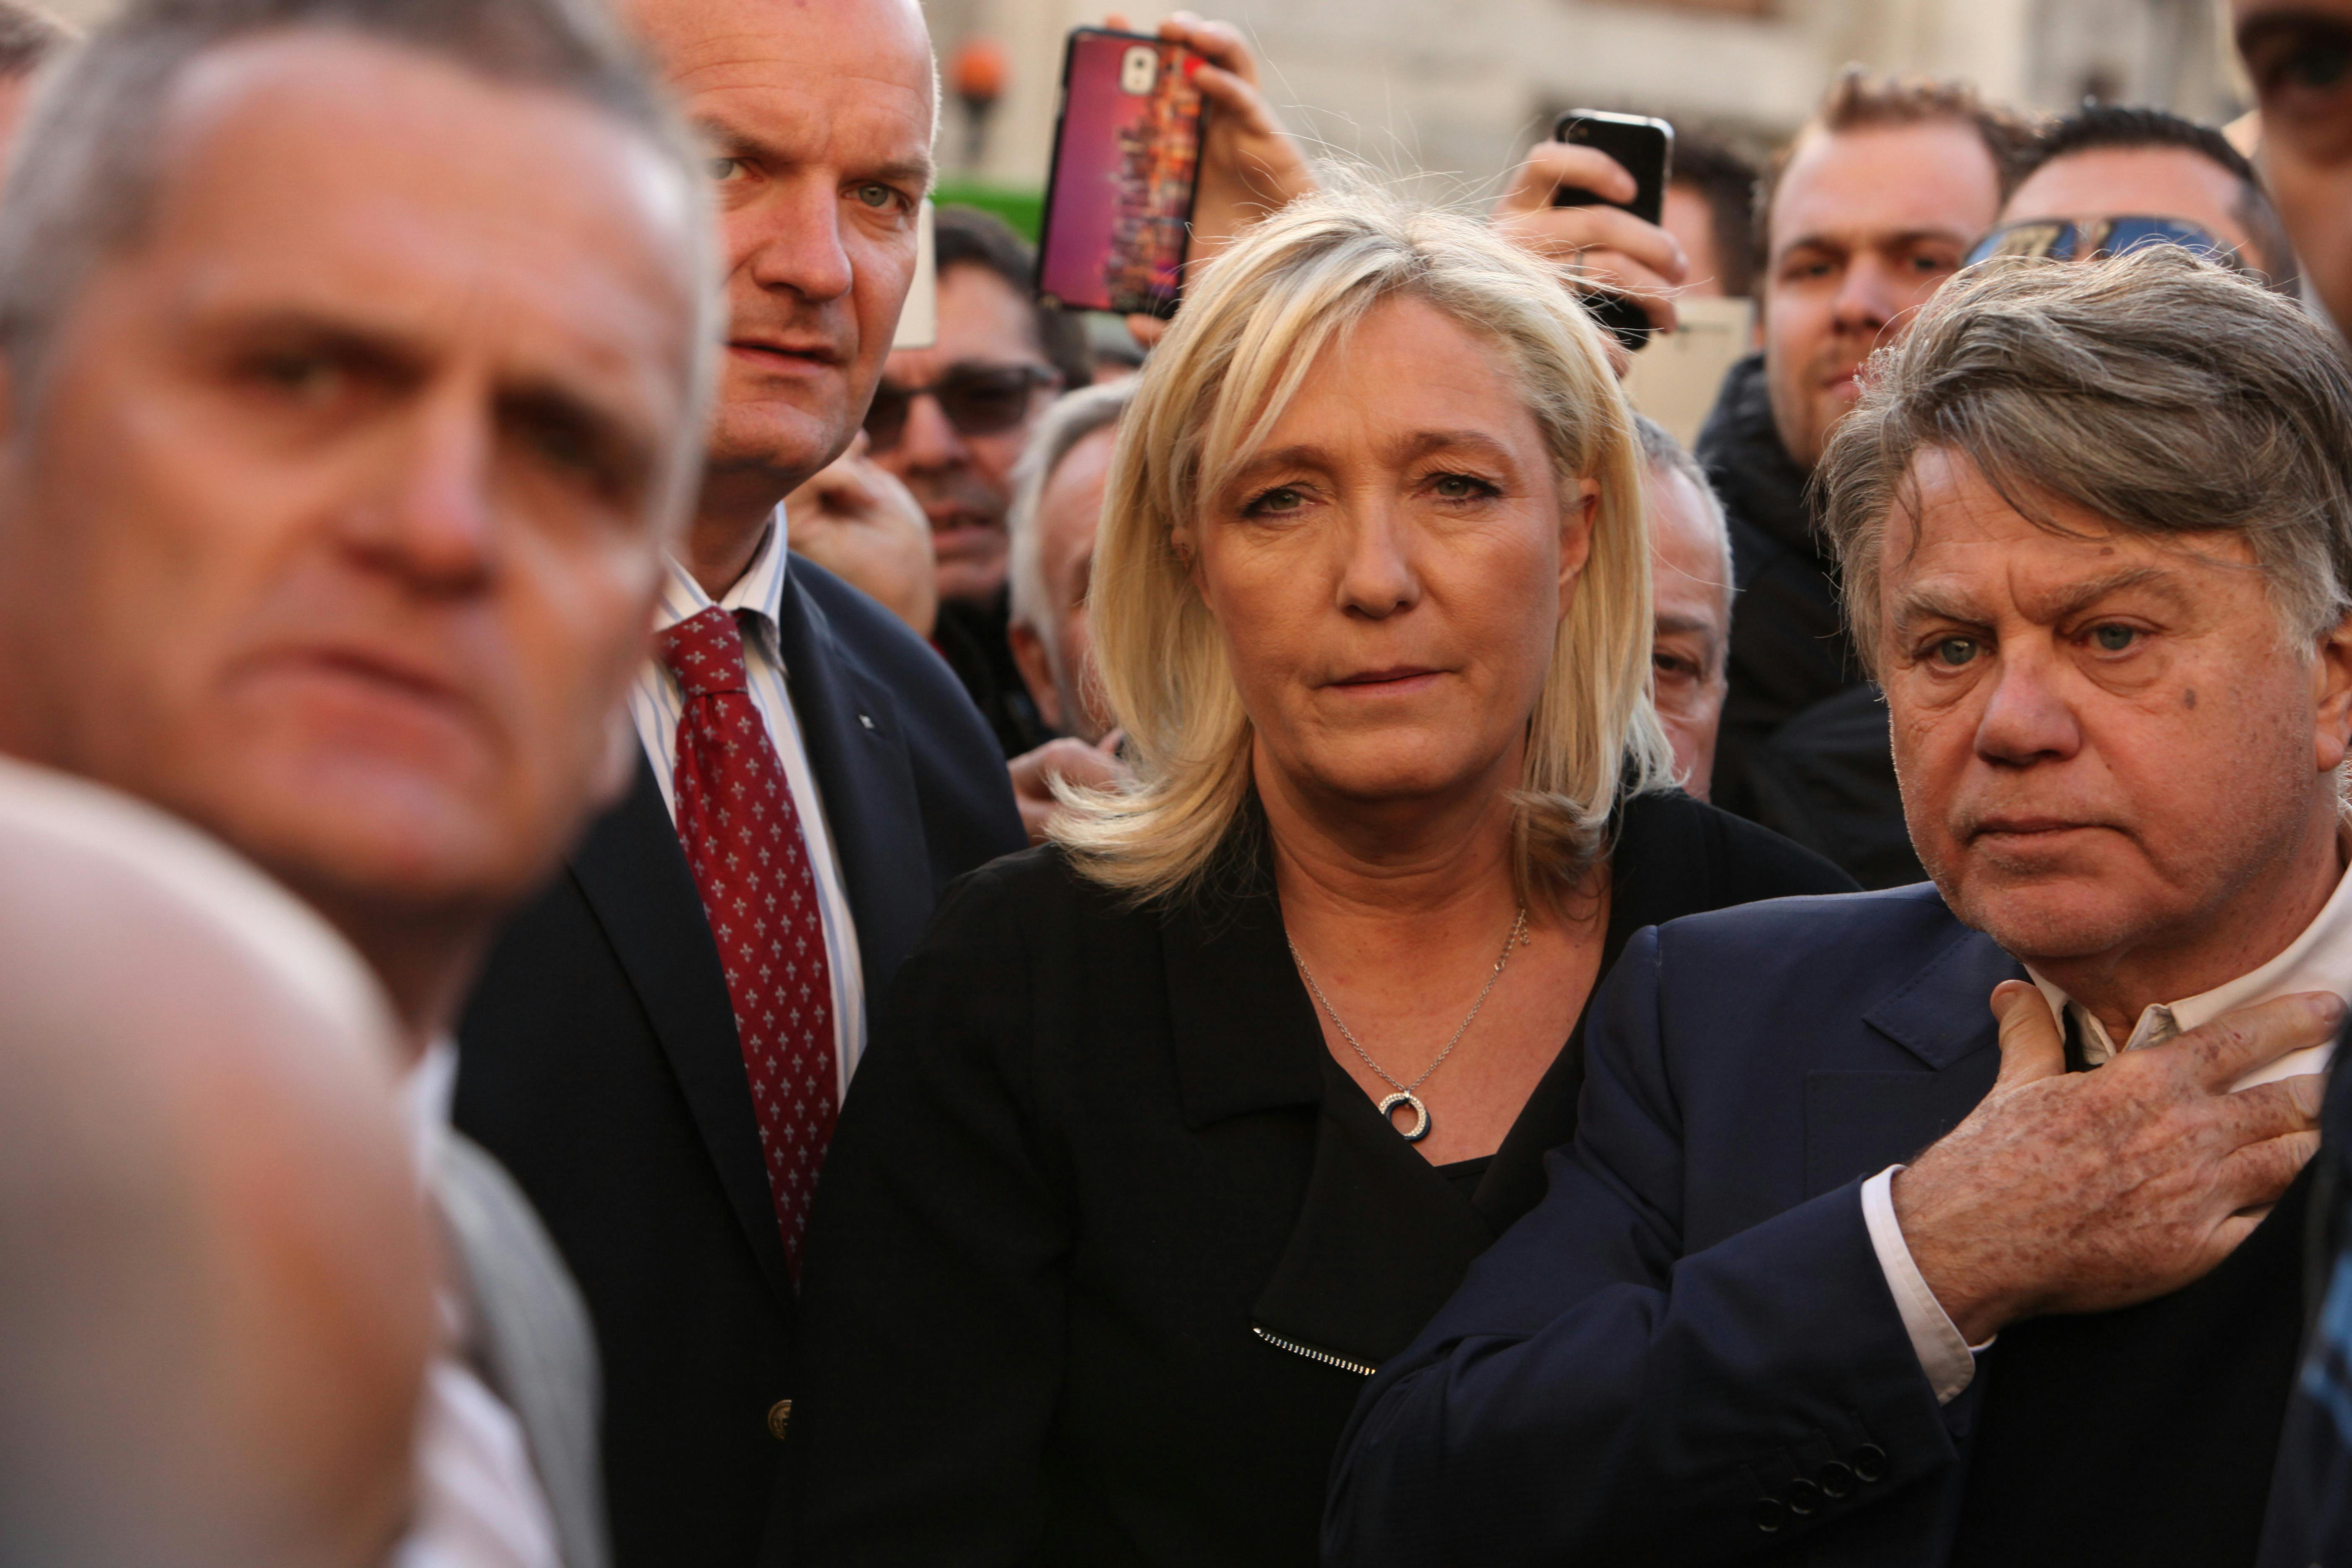 How Marine Le Pen Has Upended French Politics